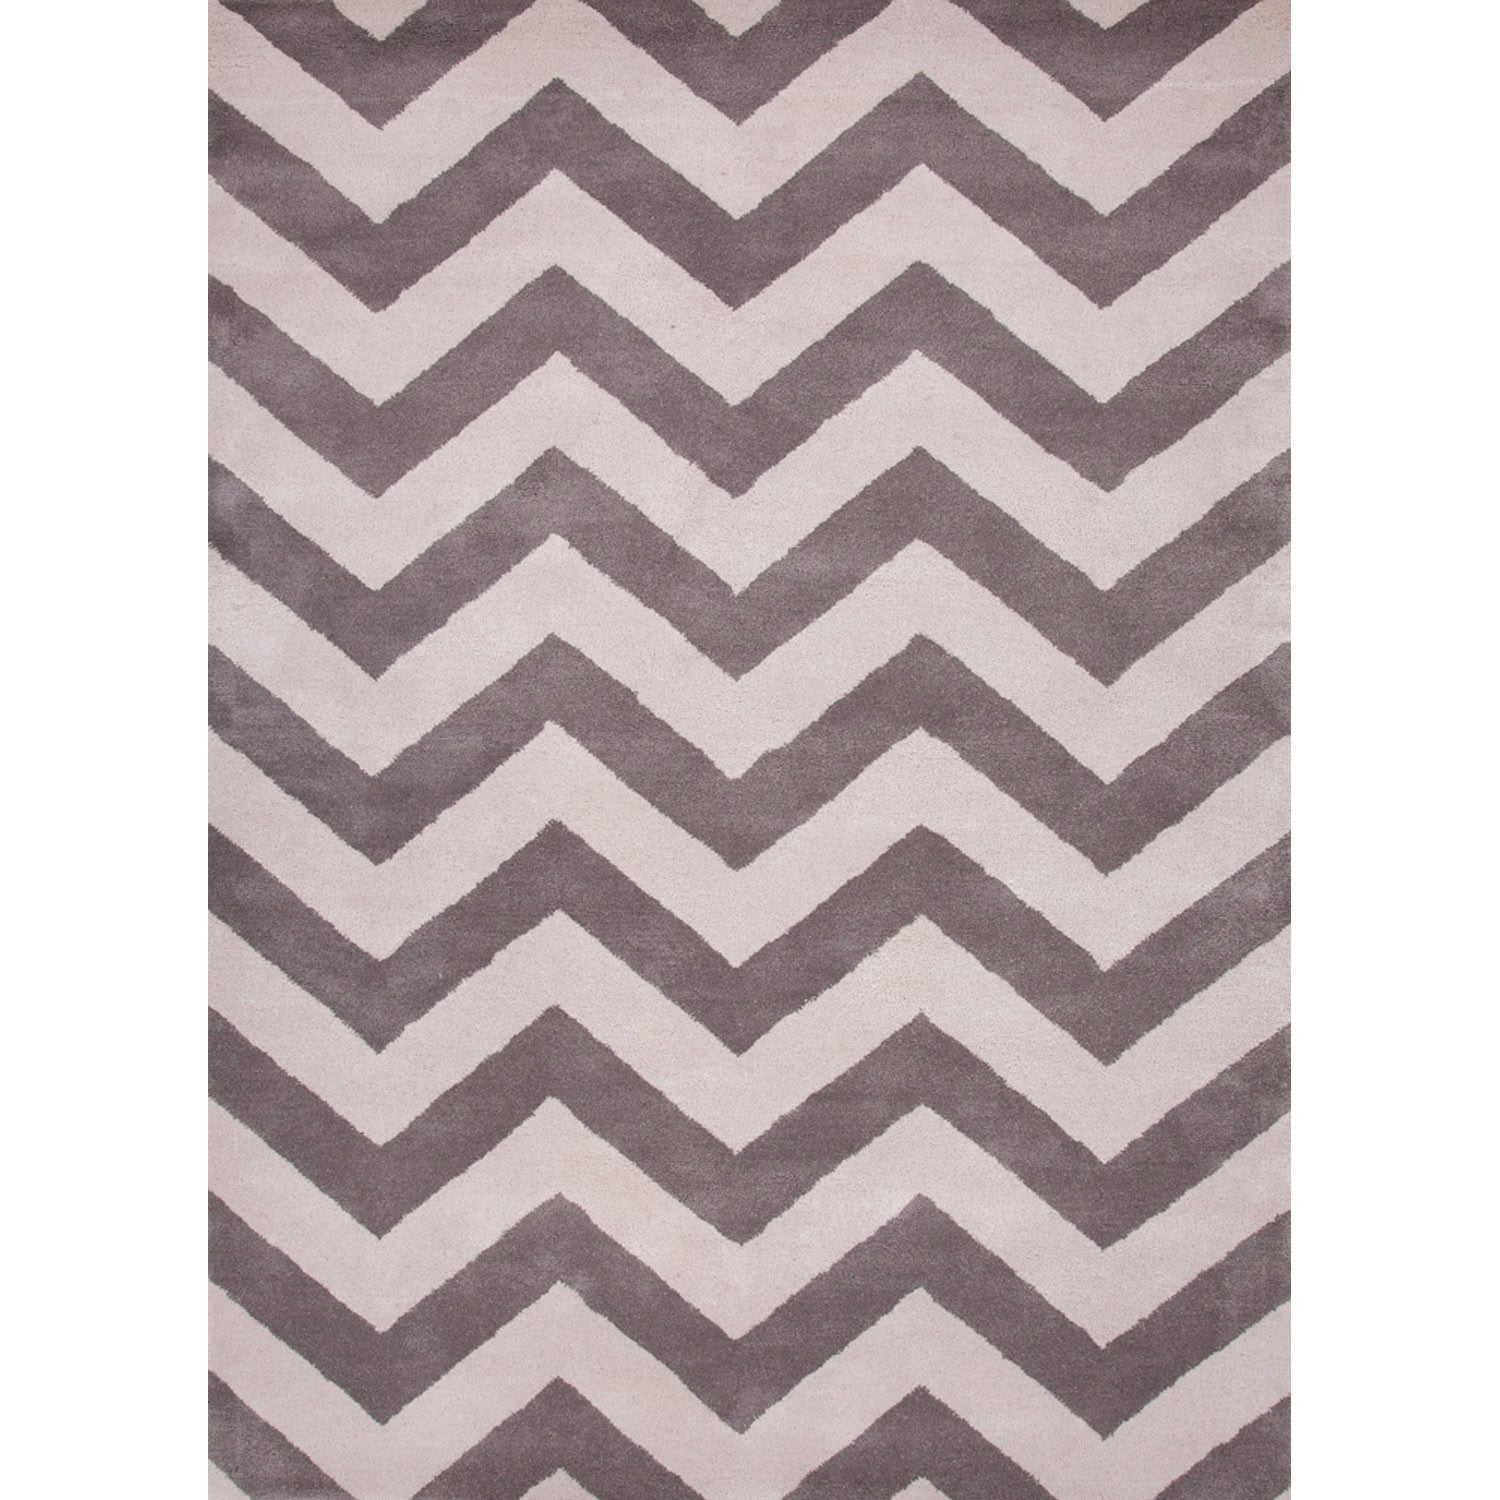 Hand tufted Contemporary Geometric Gray/ Black Wool Area Rug (5 X 8)